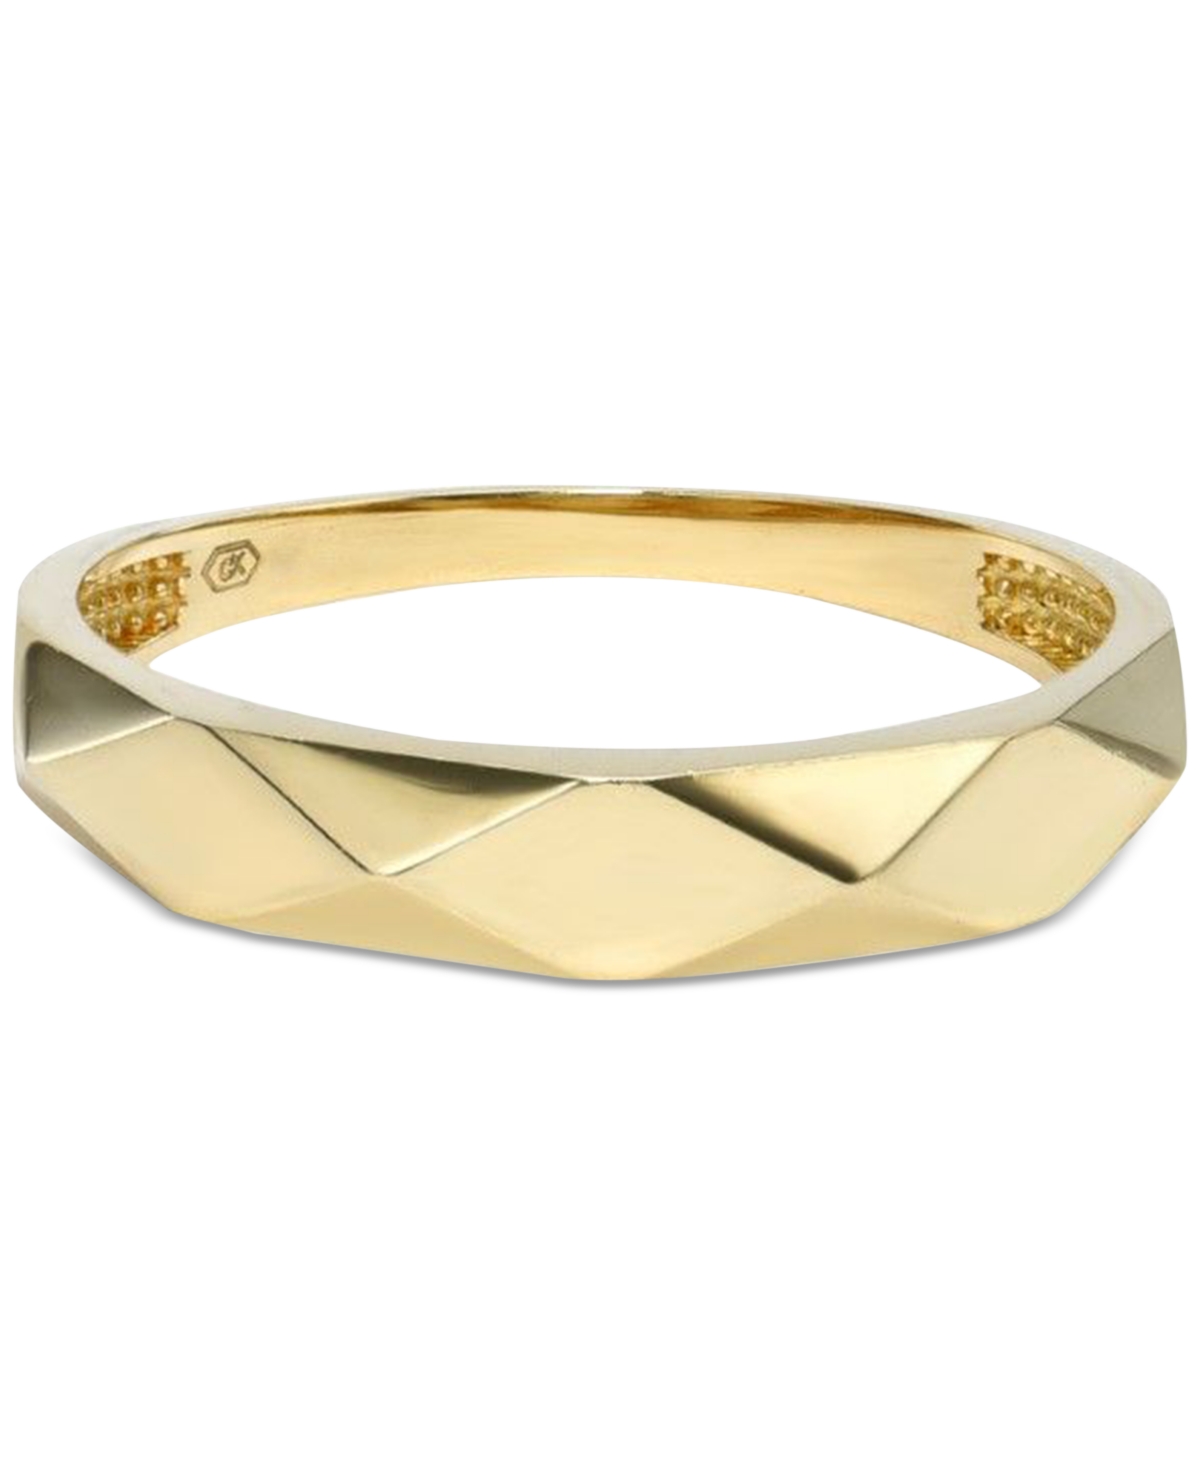 Polished Facet-Look Statement Ring in 14k Gold - Gold